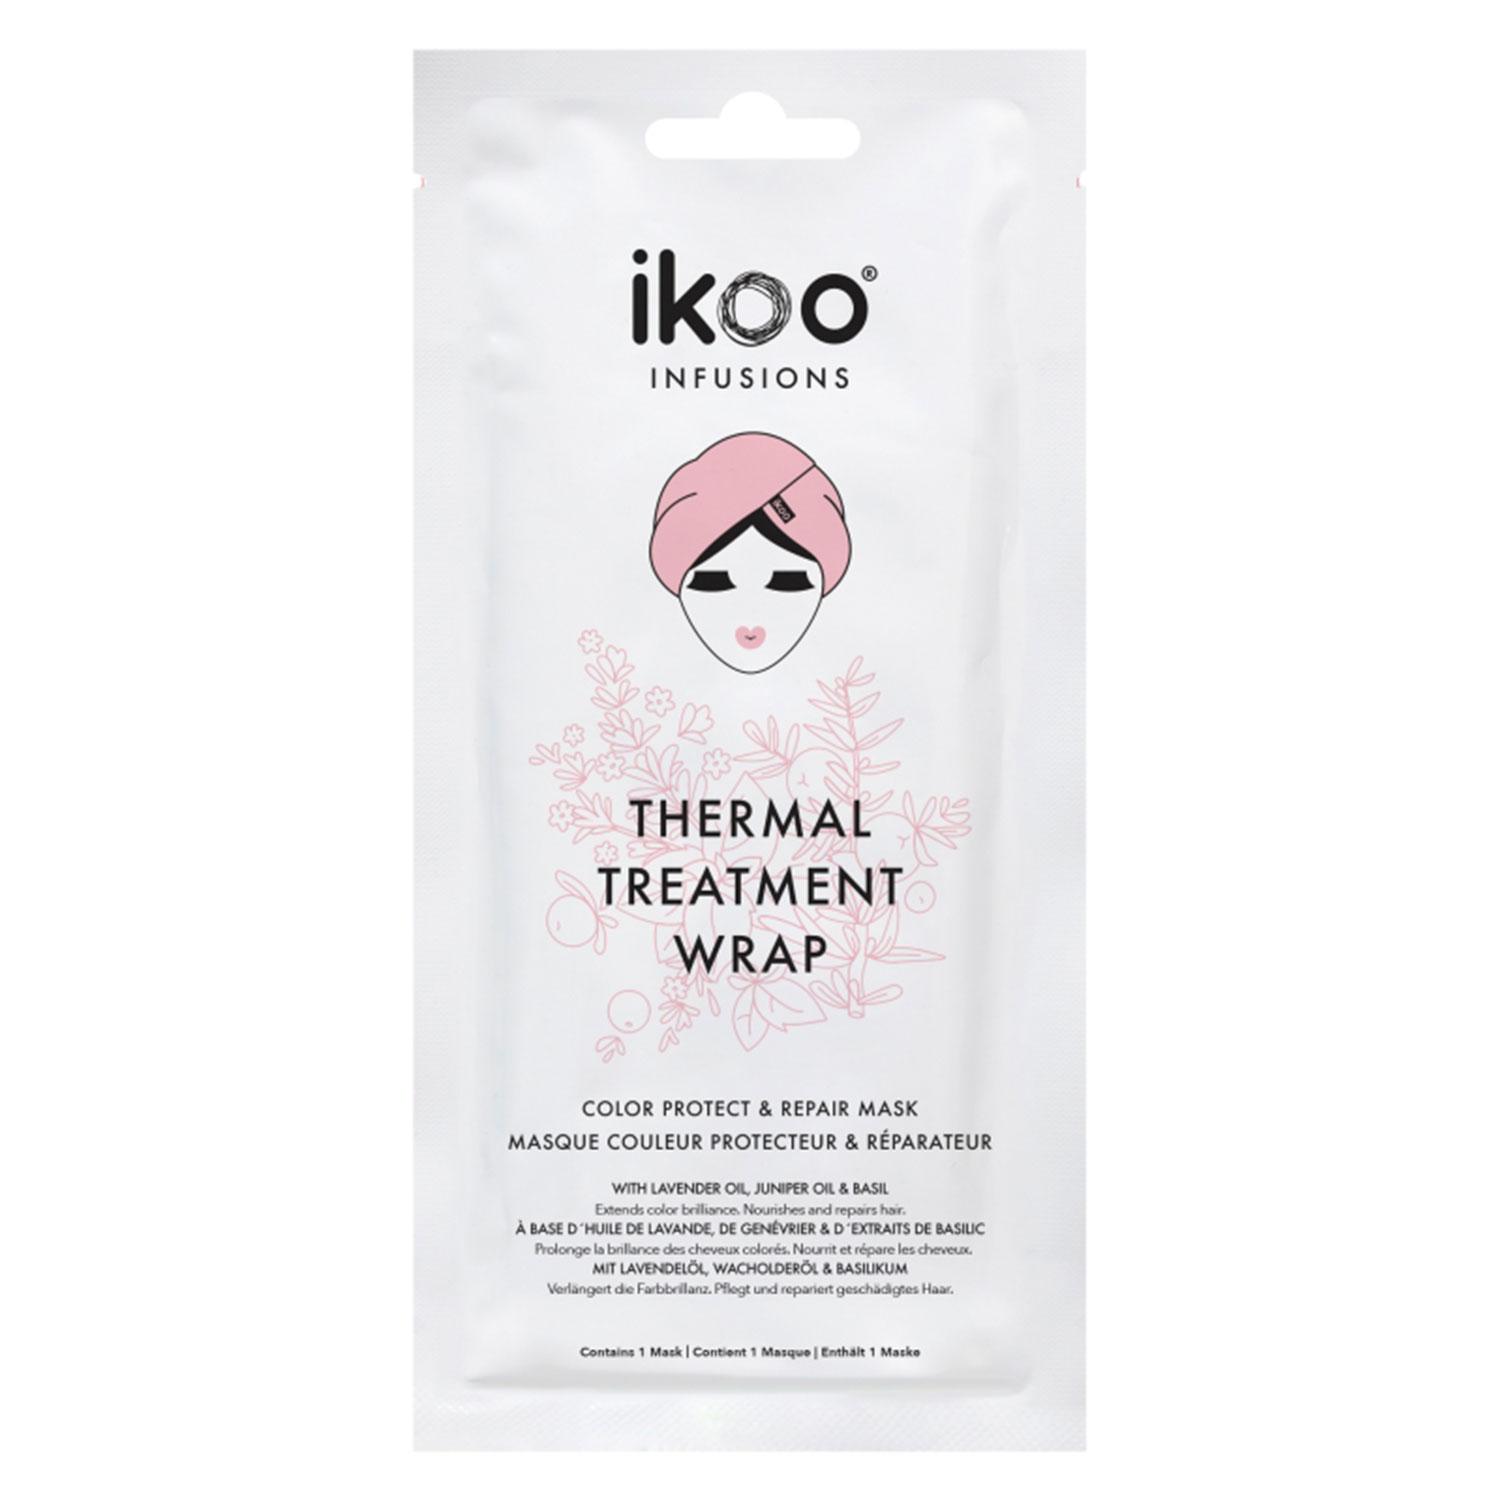 ikoo infusions - Color Protect & Repair Thermal Treatment Wrap